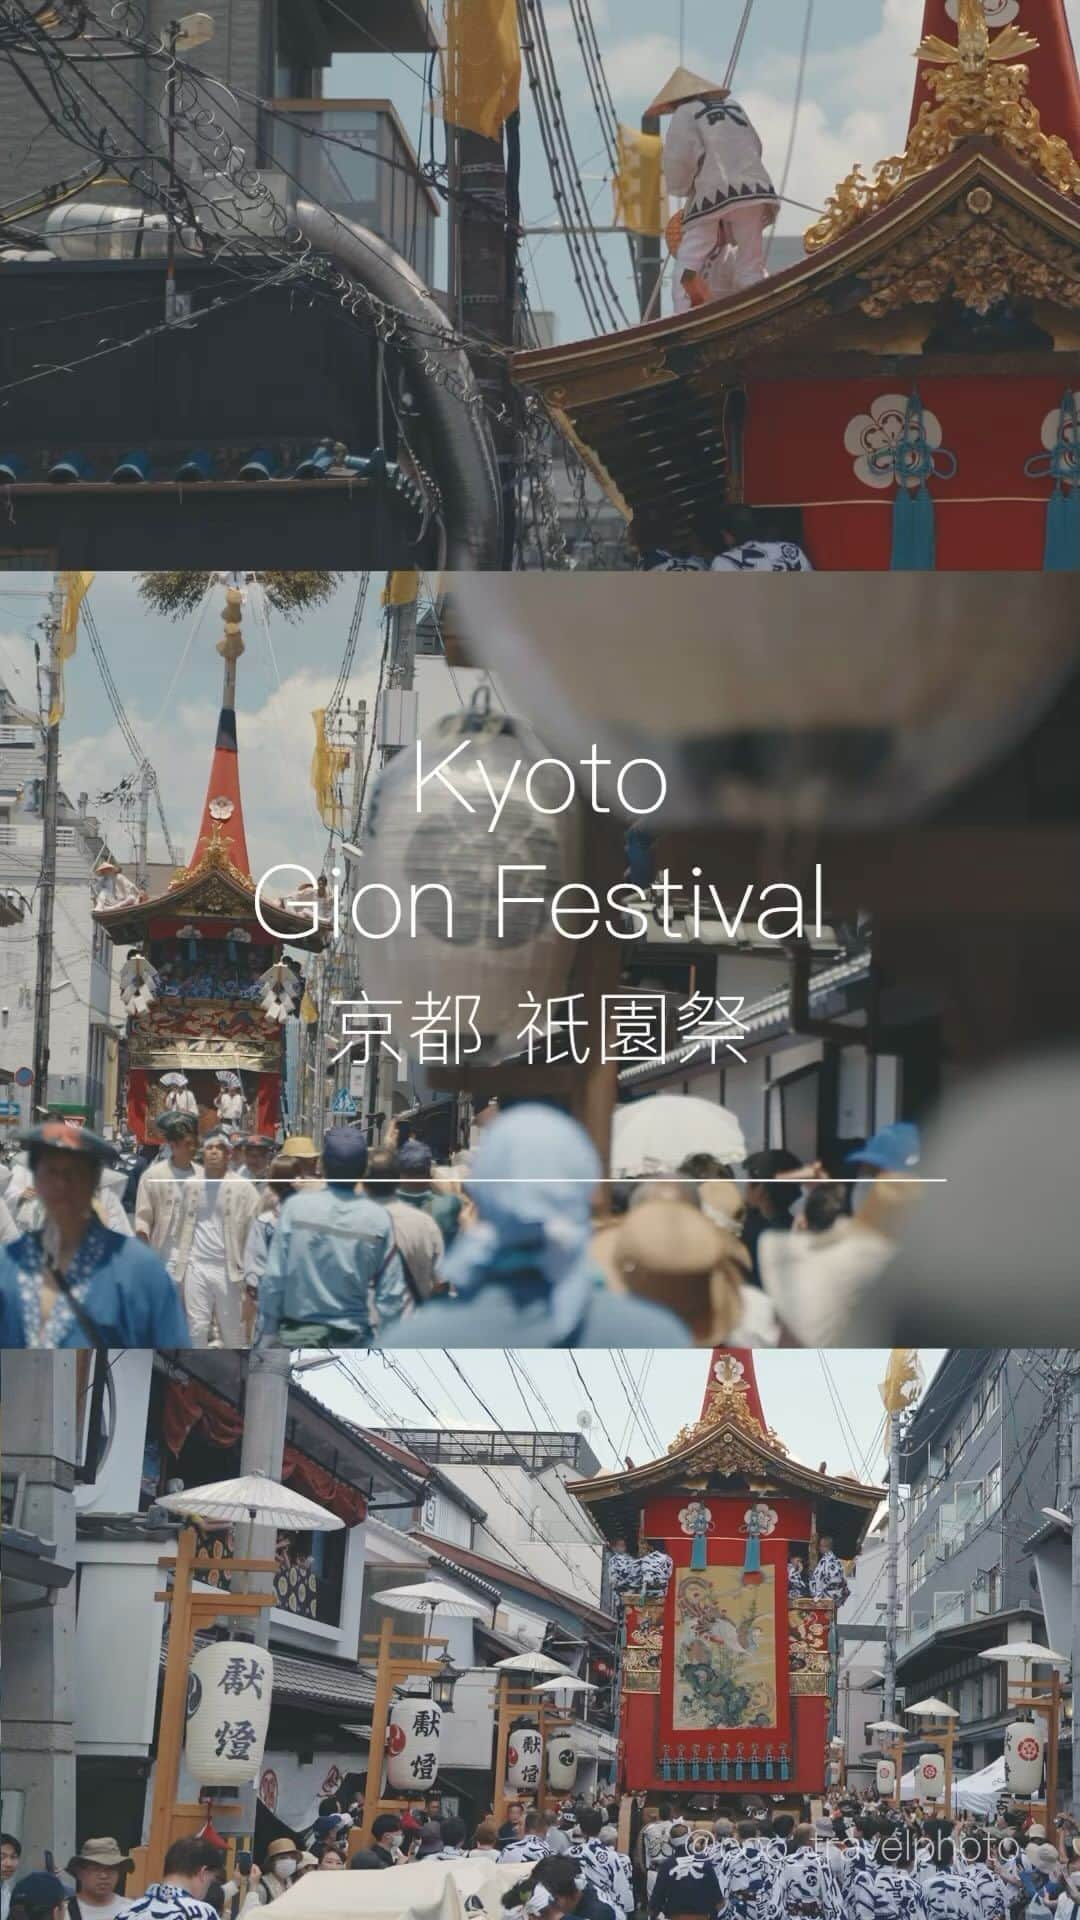 Sonoda COO Yukiyaのインスタグラム：「@coo_travelphoto ← Check more  Kyoto Gion Festivals 京都・祇園祭  Follow @coo_travelphoto to check awesome sceneries in Japan 🇯🇵📸  #gionfestival #祇園祭  #kyotophotographer #tokyophotographer #kyoto #travel #travelphotographer #japan #japantravel #kyototravel #proposalphotographer #weddingphotographer #japanko_official」